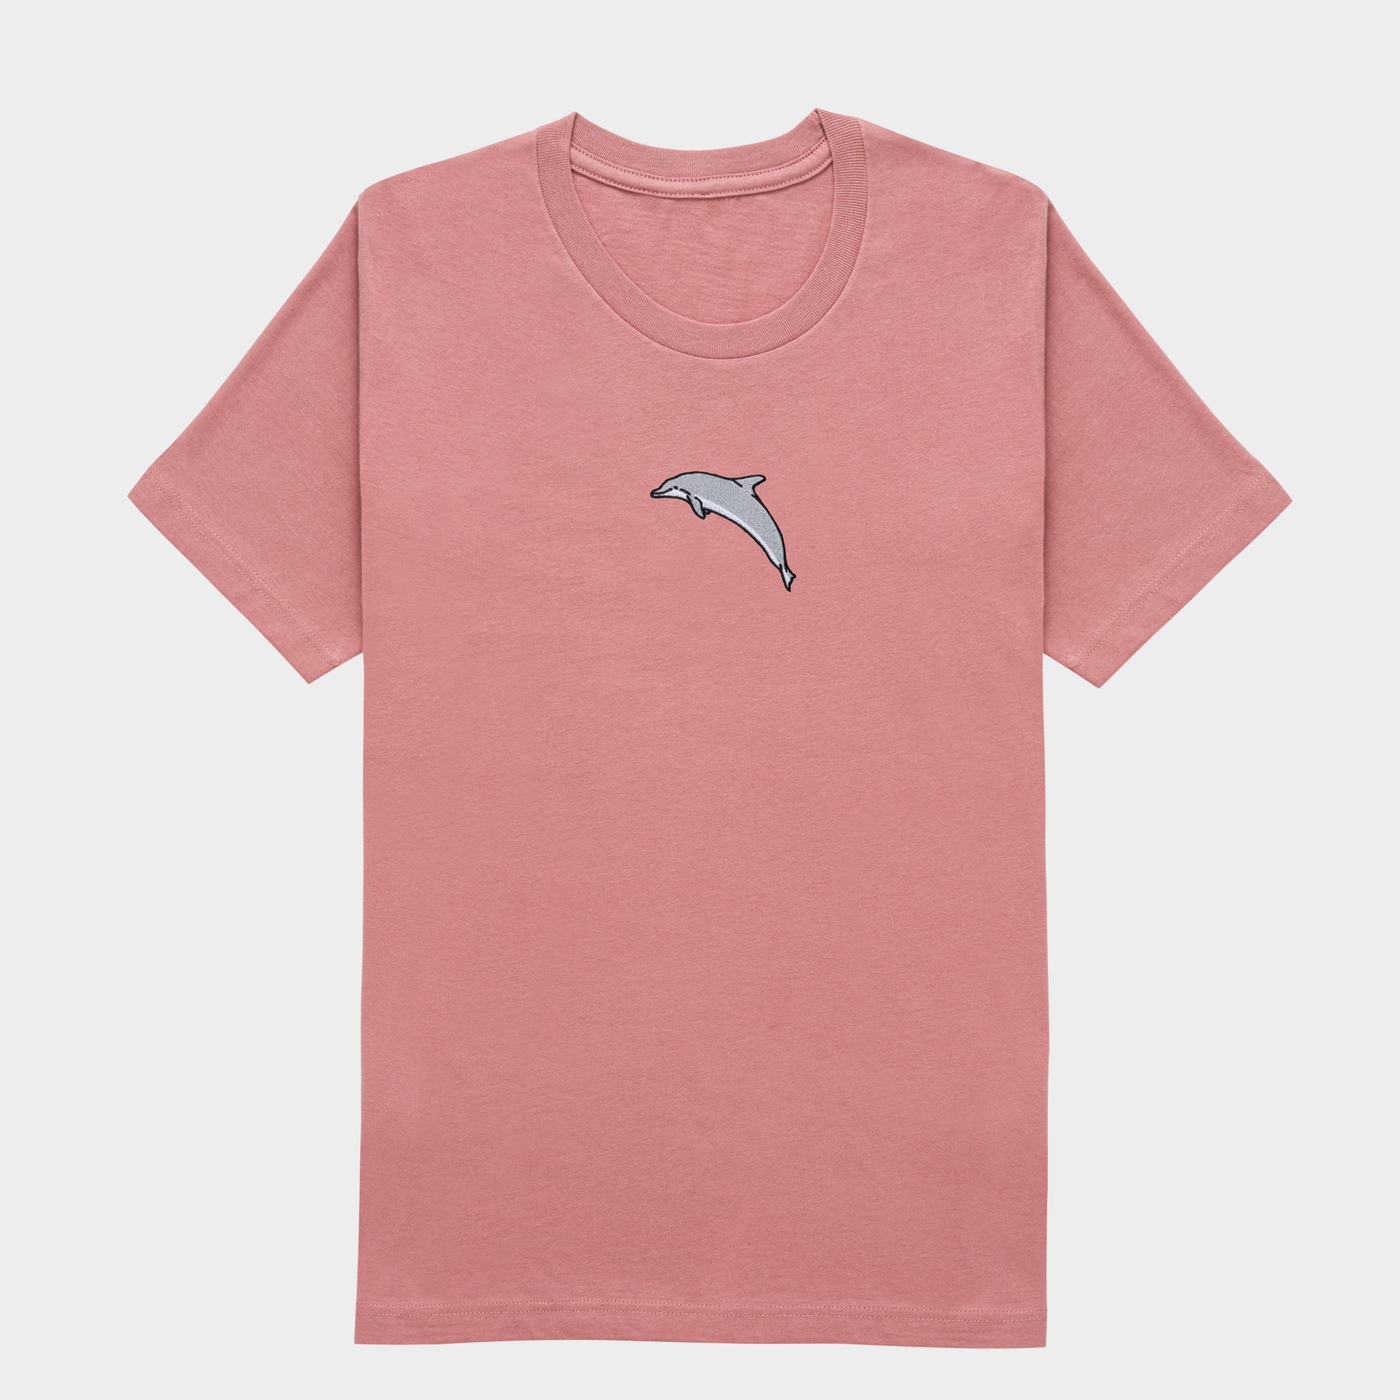 Bobby's Planet Women's Embroidered Dolphin T-Shirt from Seven Seas Fish Animals Collection in Mauve Color#color_mauve